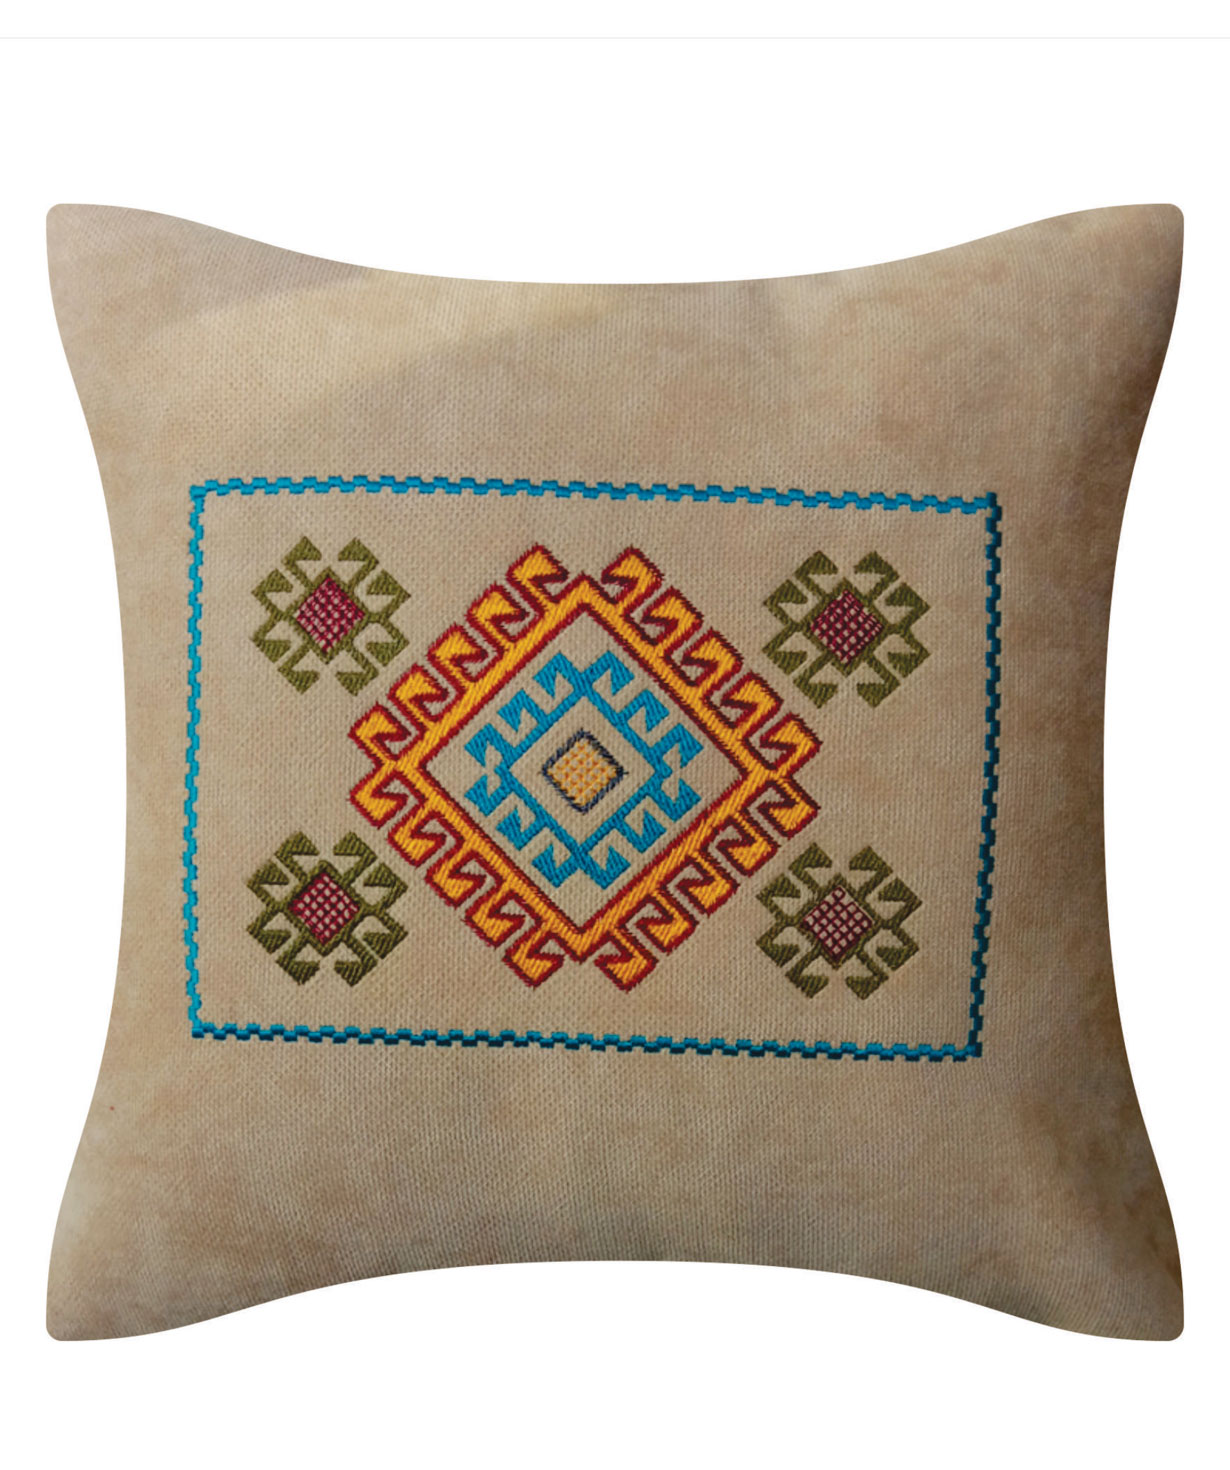 Pillow `Miskaryan heritage` embroidered with Armenian ornament №28